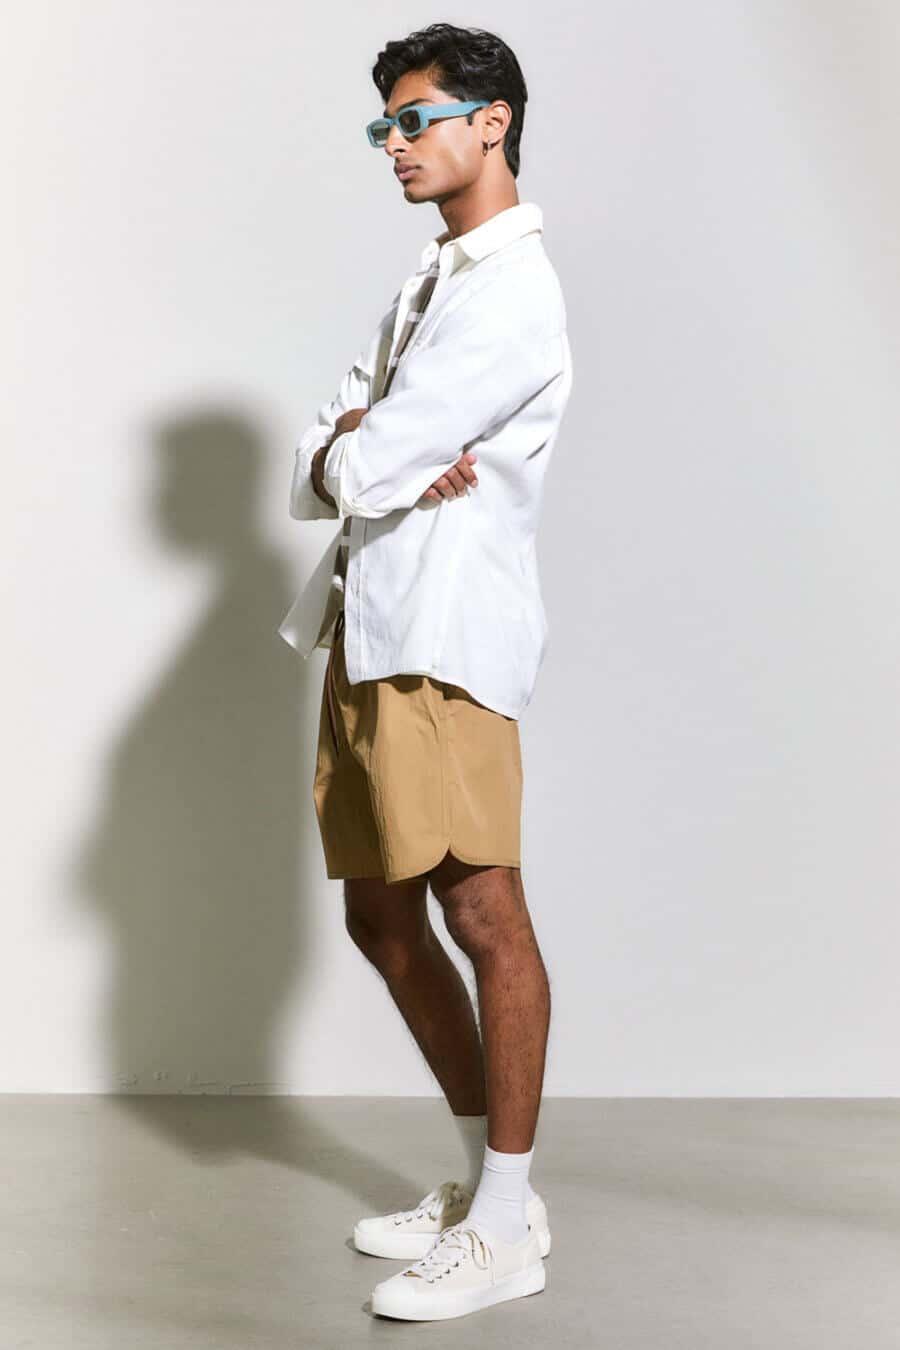 Men's swim shorts, linen shirt and white sneakers outfit